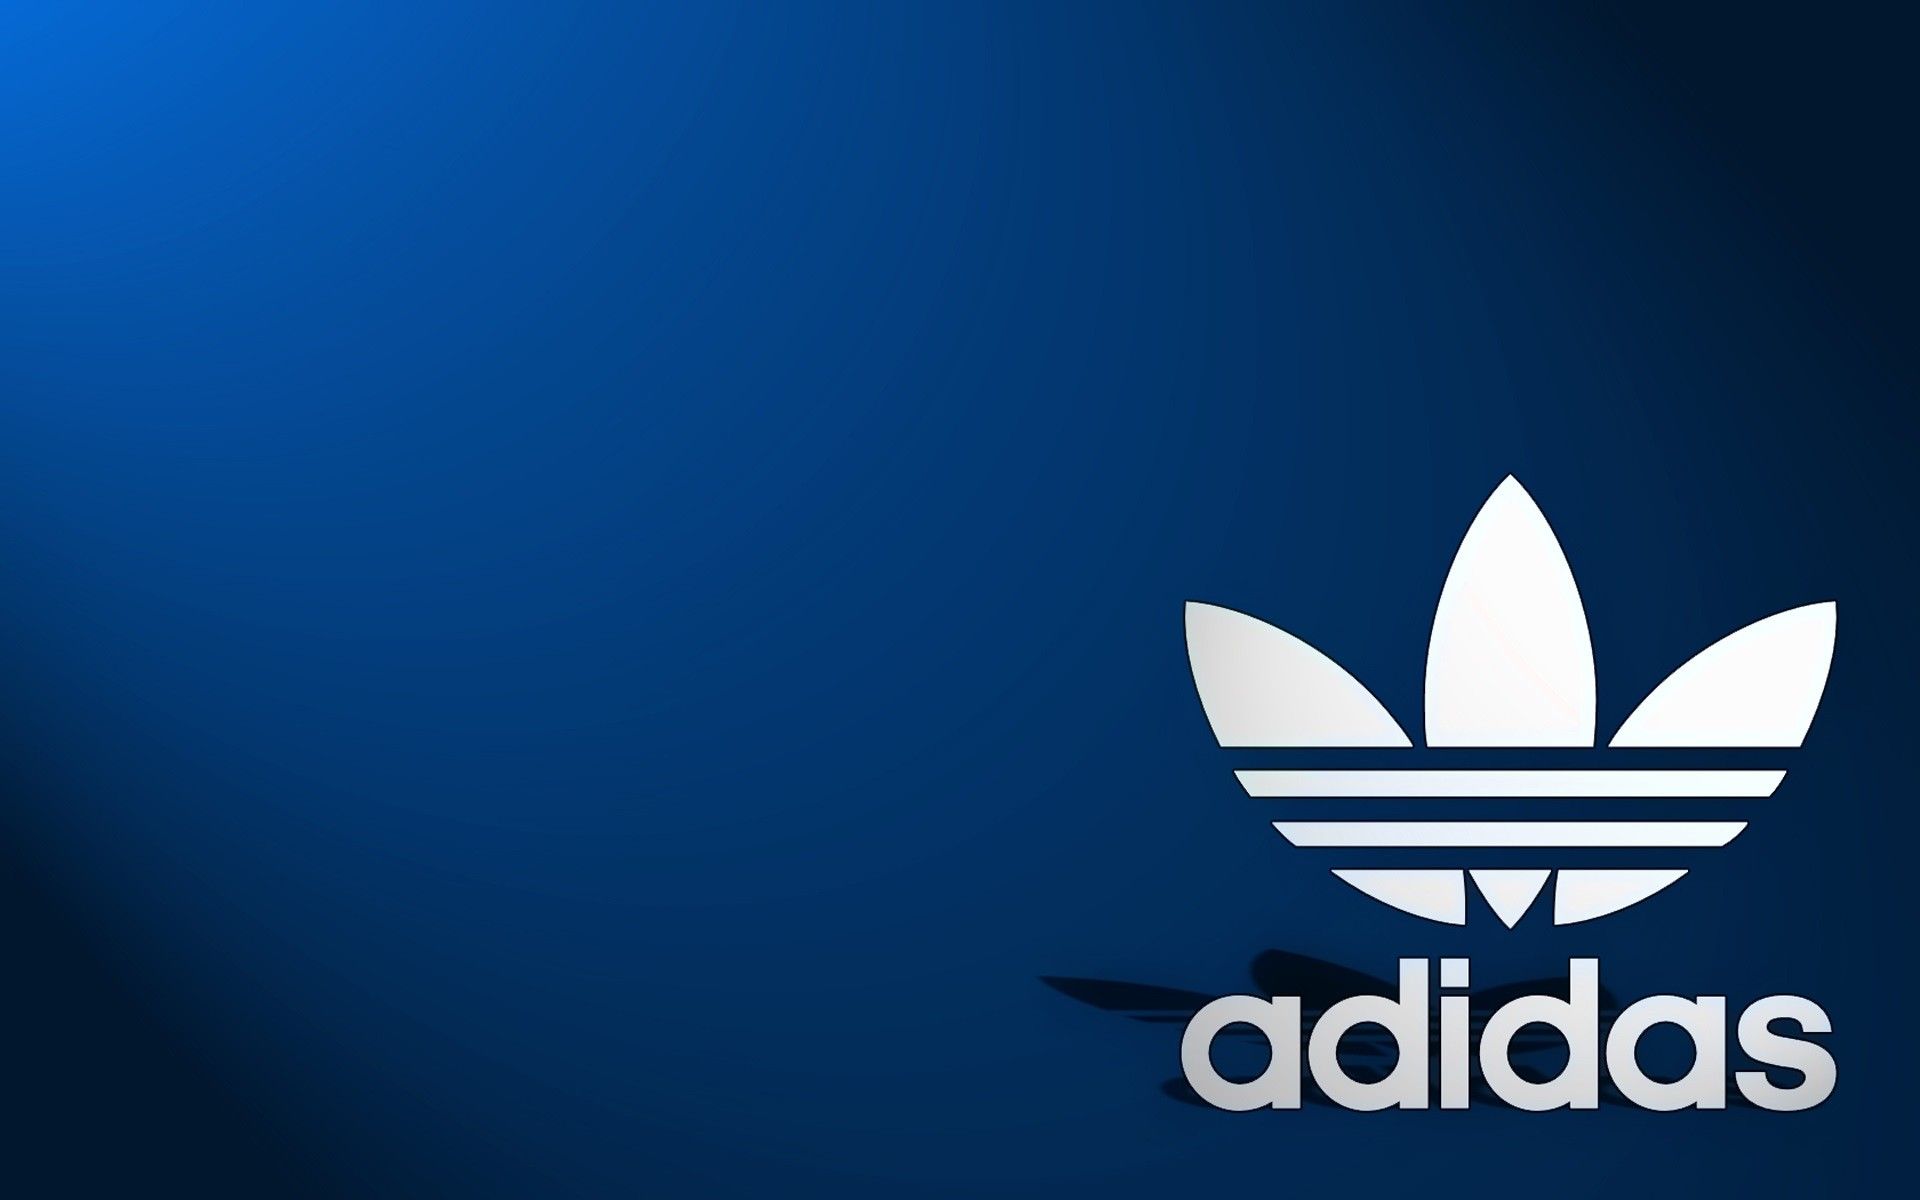 Blue Adidas Wallpapers on